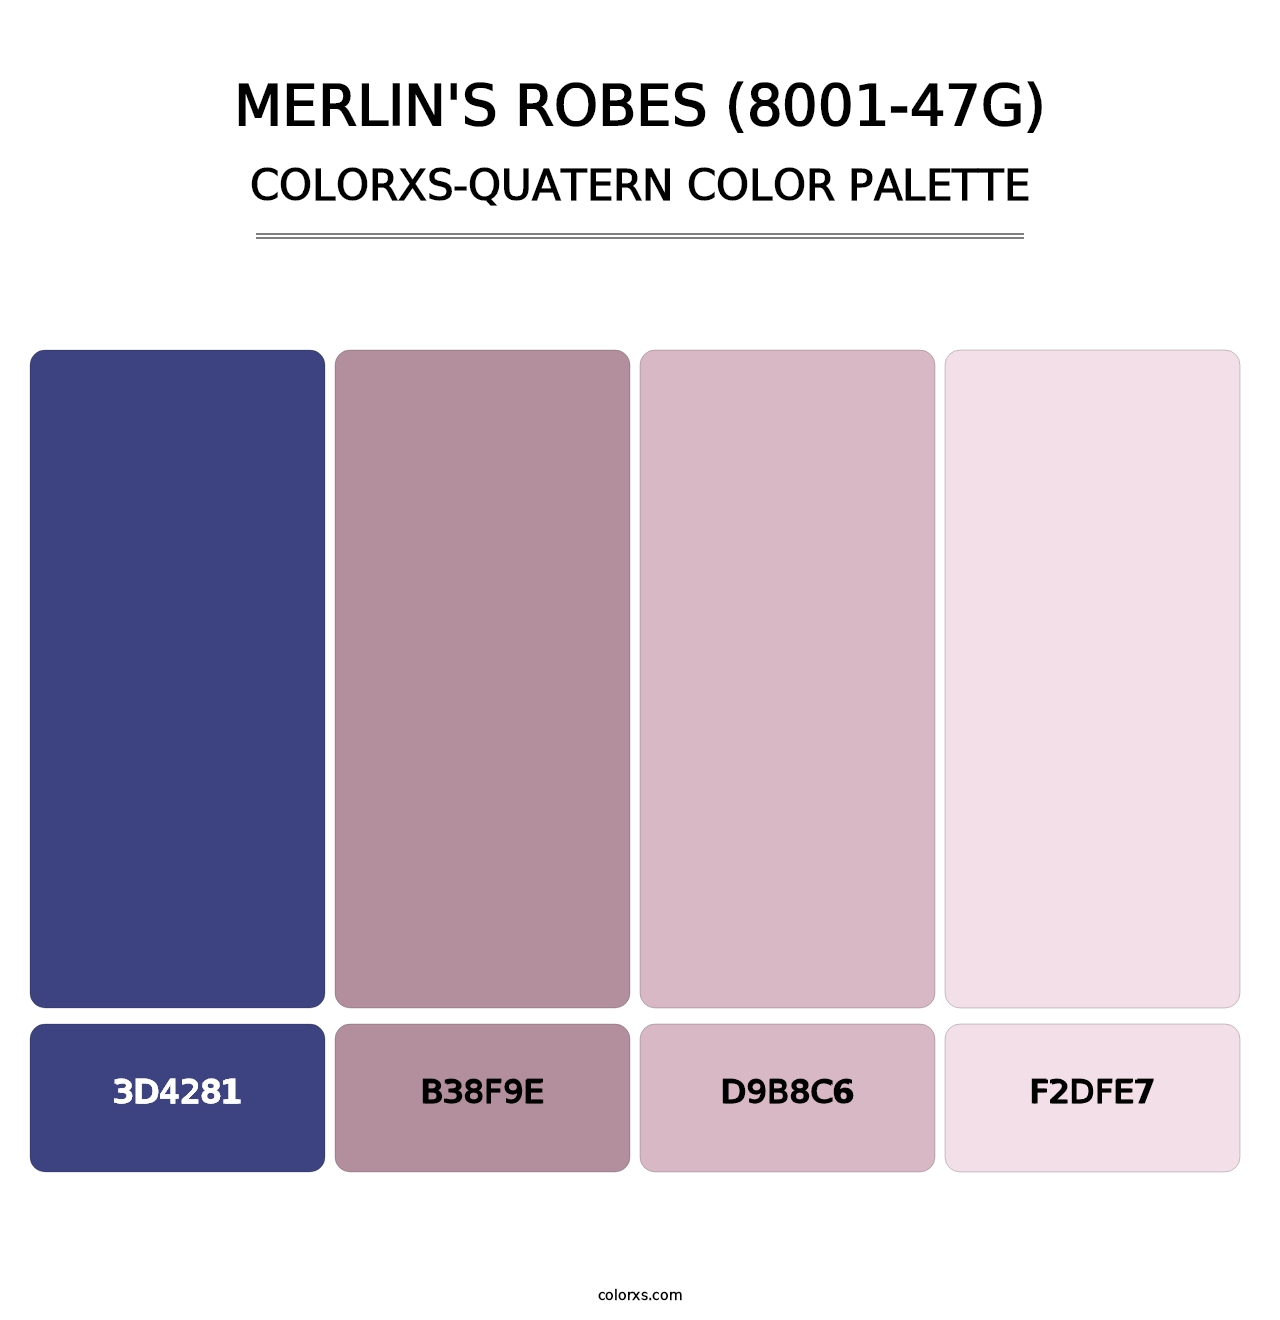 Merlin's Robes (8001-47G) - Colorxs Quatern Palette